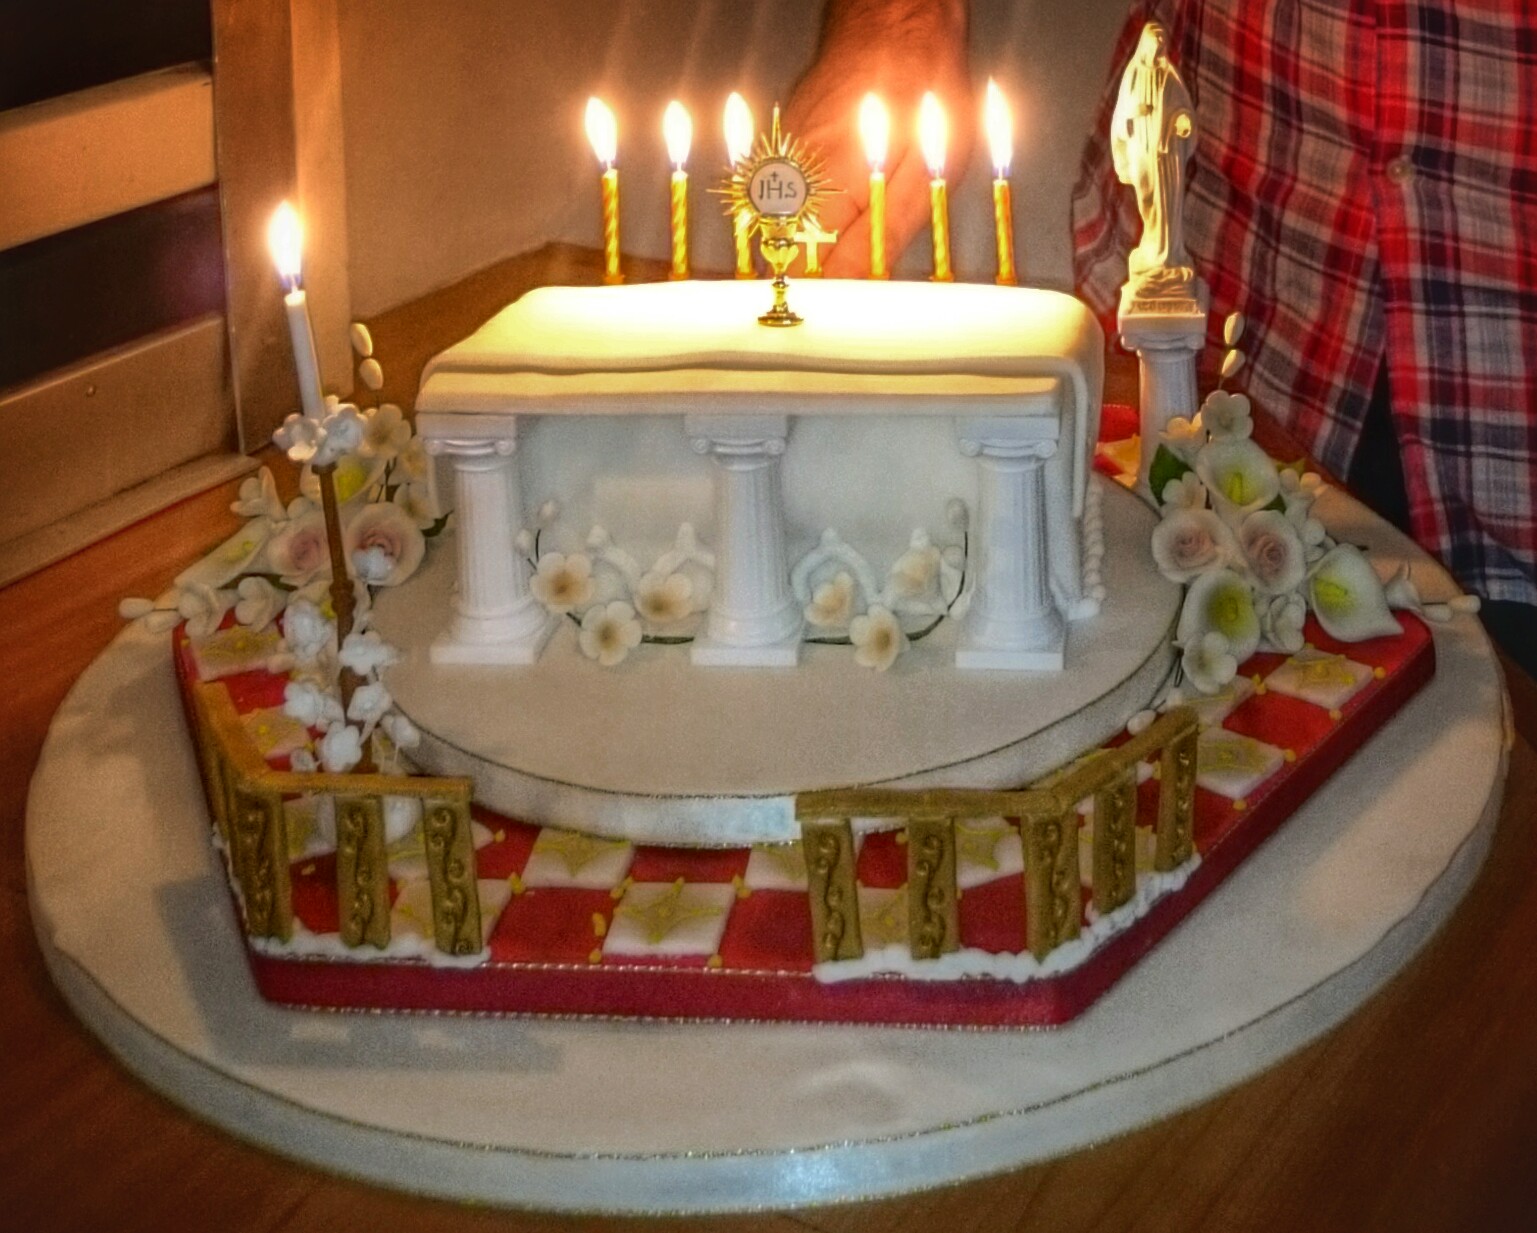 Beautiful Birthday Cakes for Priest Rev Father and Pastors